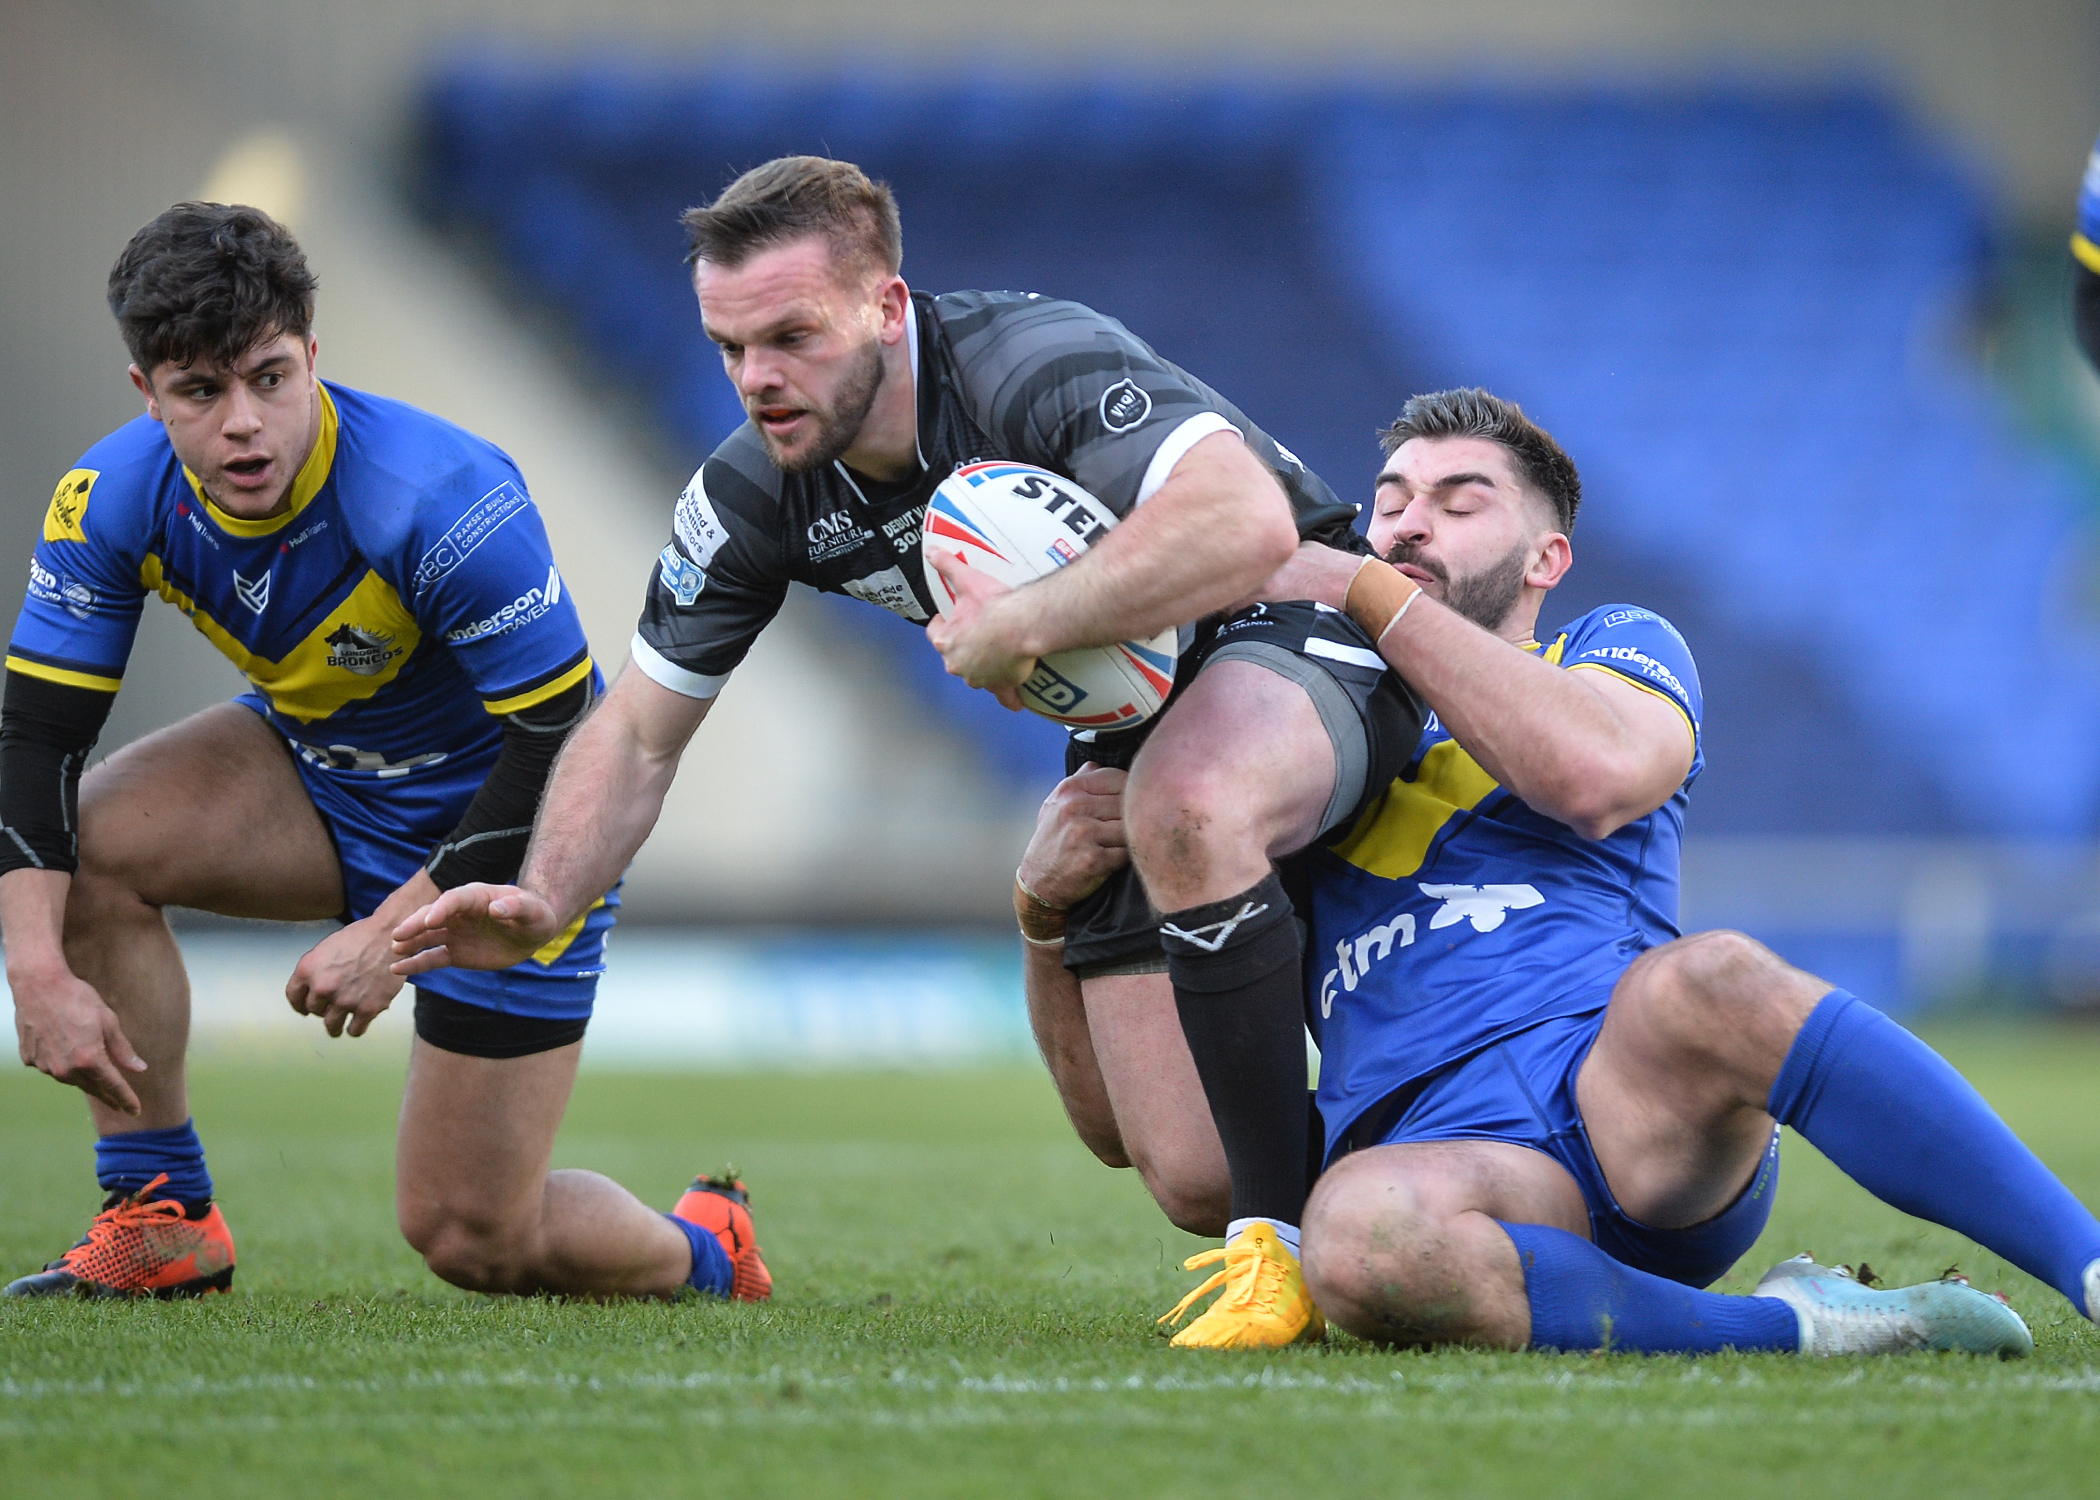 London Broncos game available for free on Widnes TV